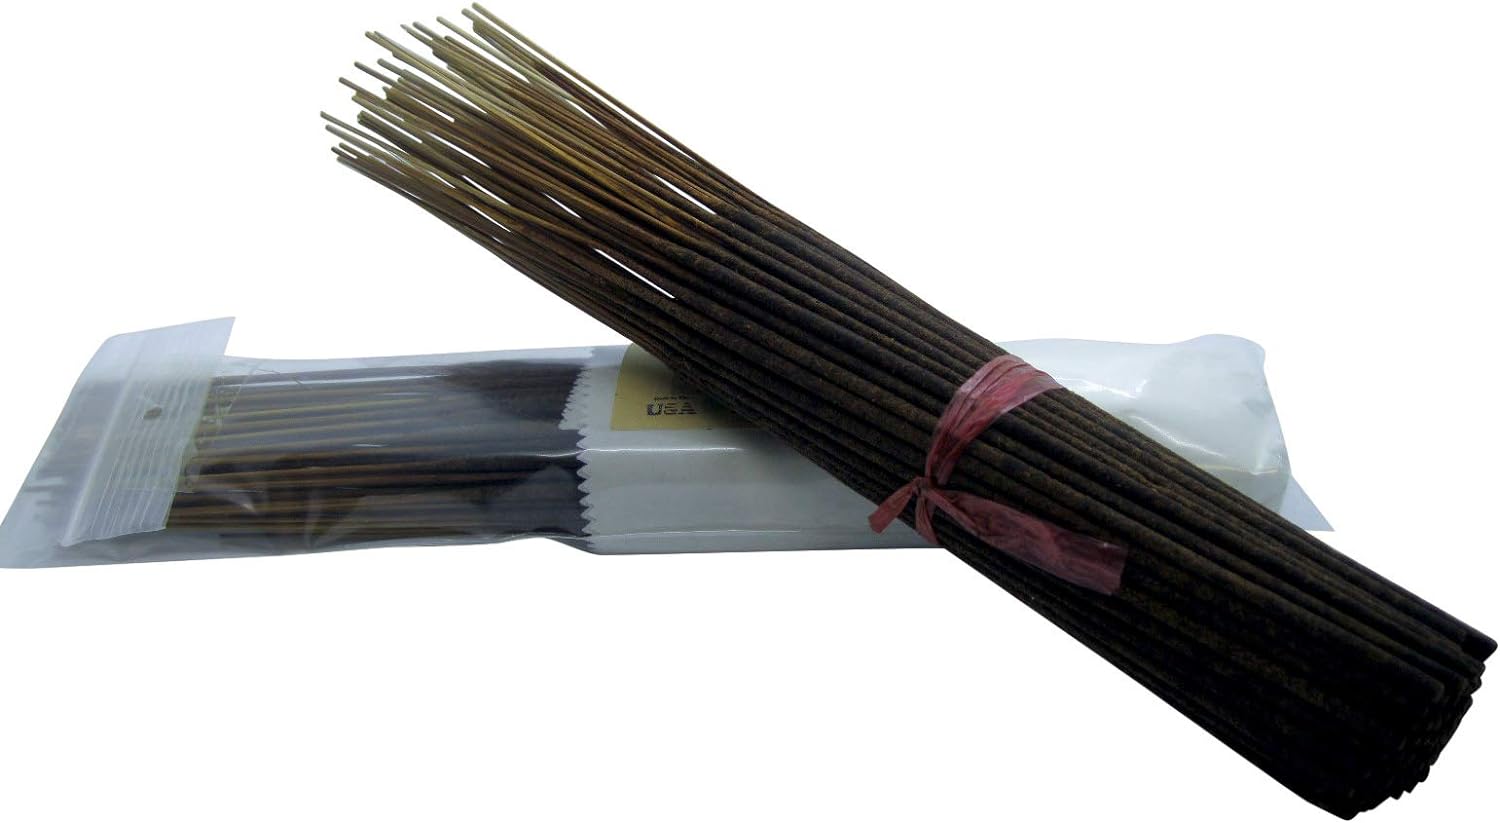 Jane Bernard Black Coconut Incense Sticks_One (1) Bundle Only of 100_11 Long_Hand-Dipped in Scented Oil